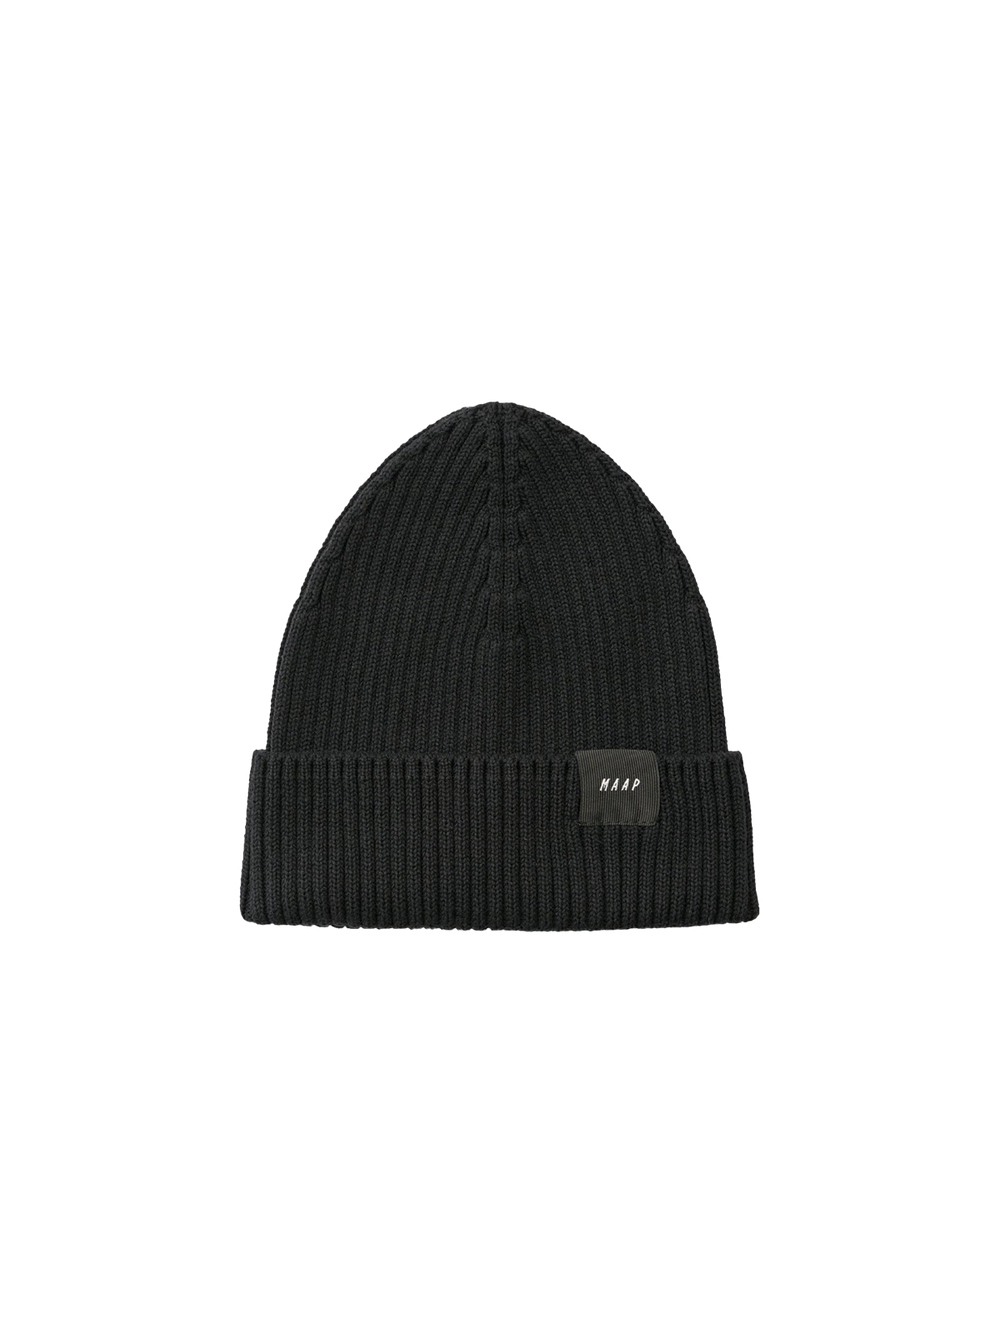 Product Image for Evade Beanie 2.0